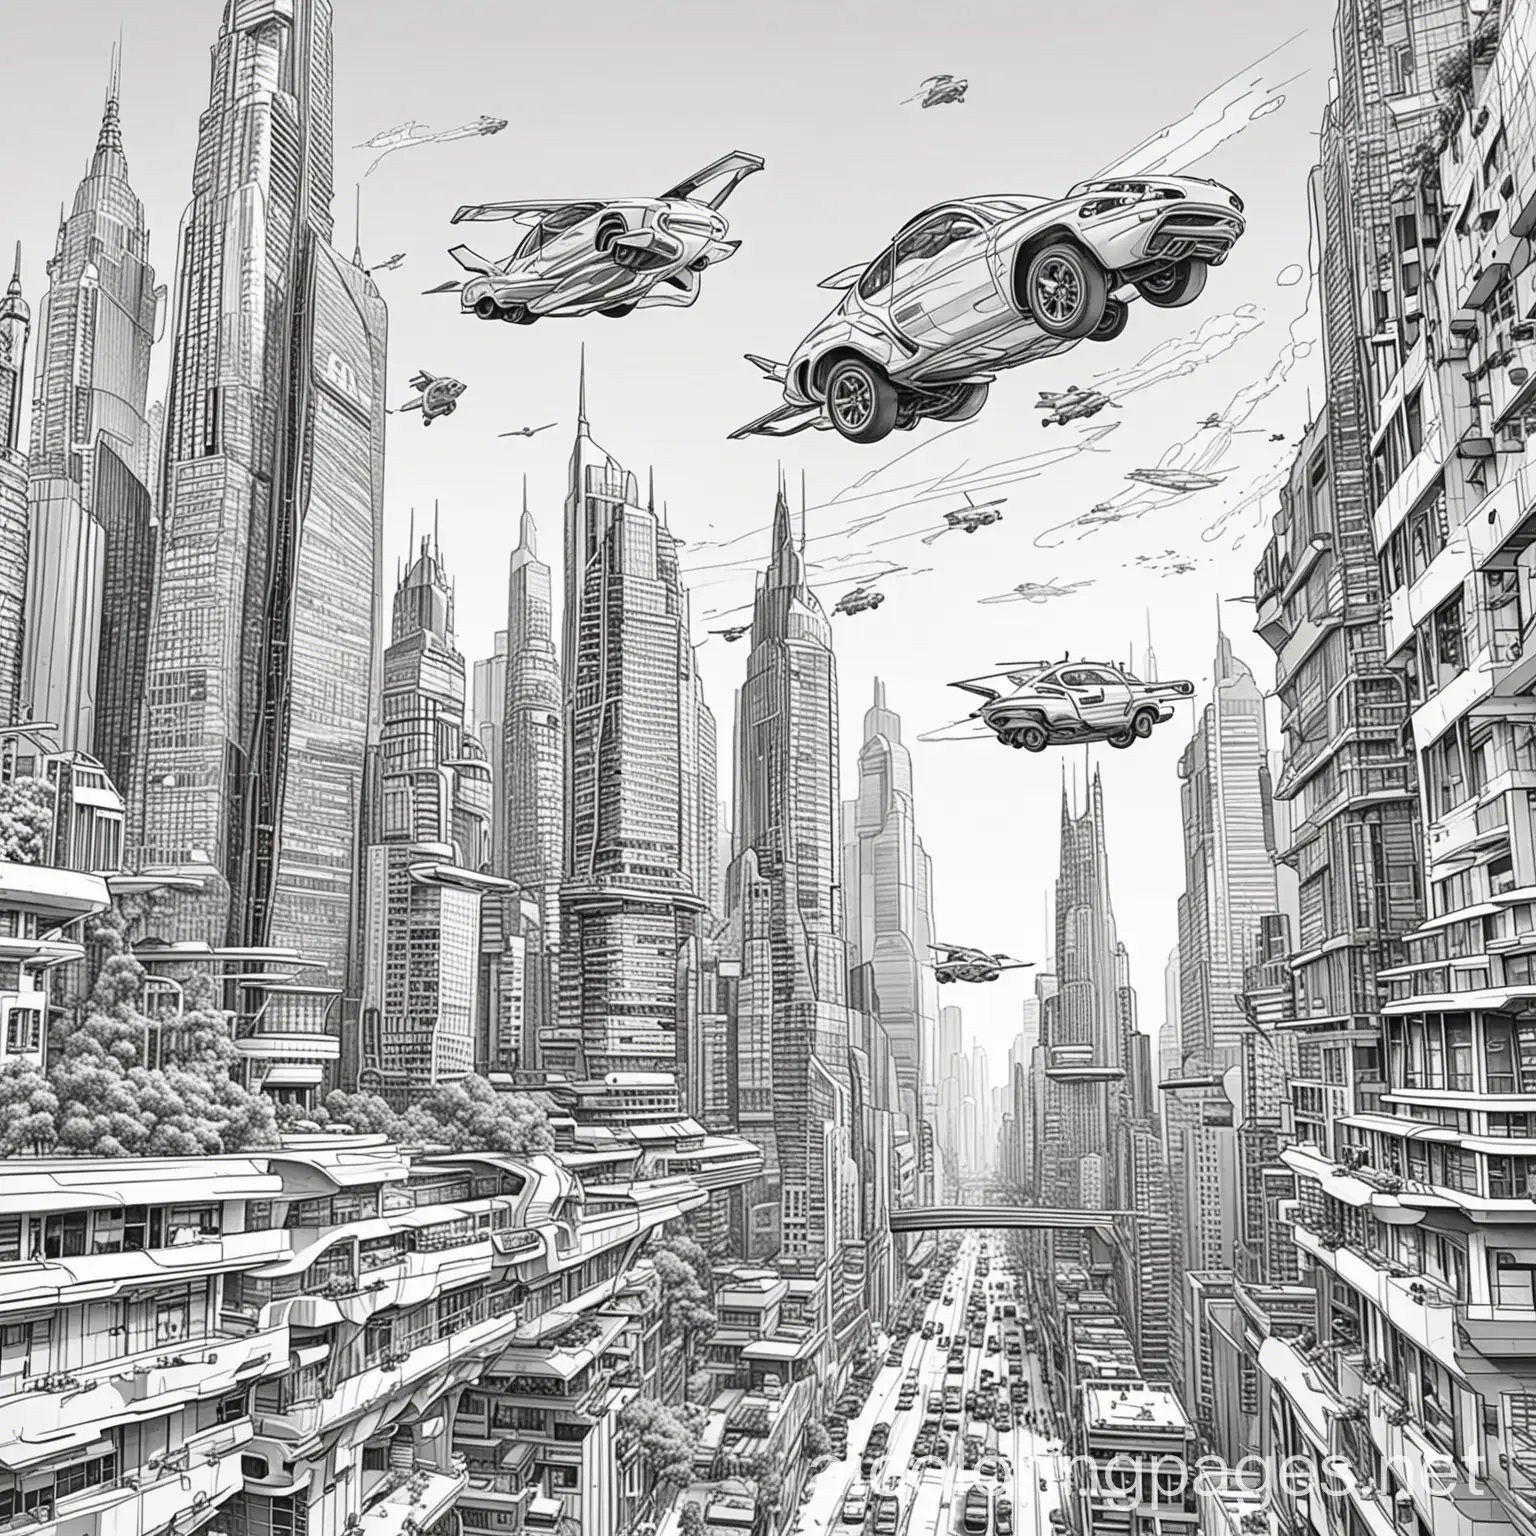 (A futuristic cityscape with towering skyscrapers and flying cars), Coloring Page, black and white, line art, white background, Simplicity, Ample White Space. The background of the coloring page is plain white to make it easy for young children to color within the lines. The outlines of all the subjects are easy to distinguish, making it simple for kids to color without too much difficulty